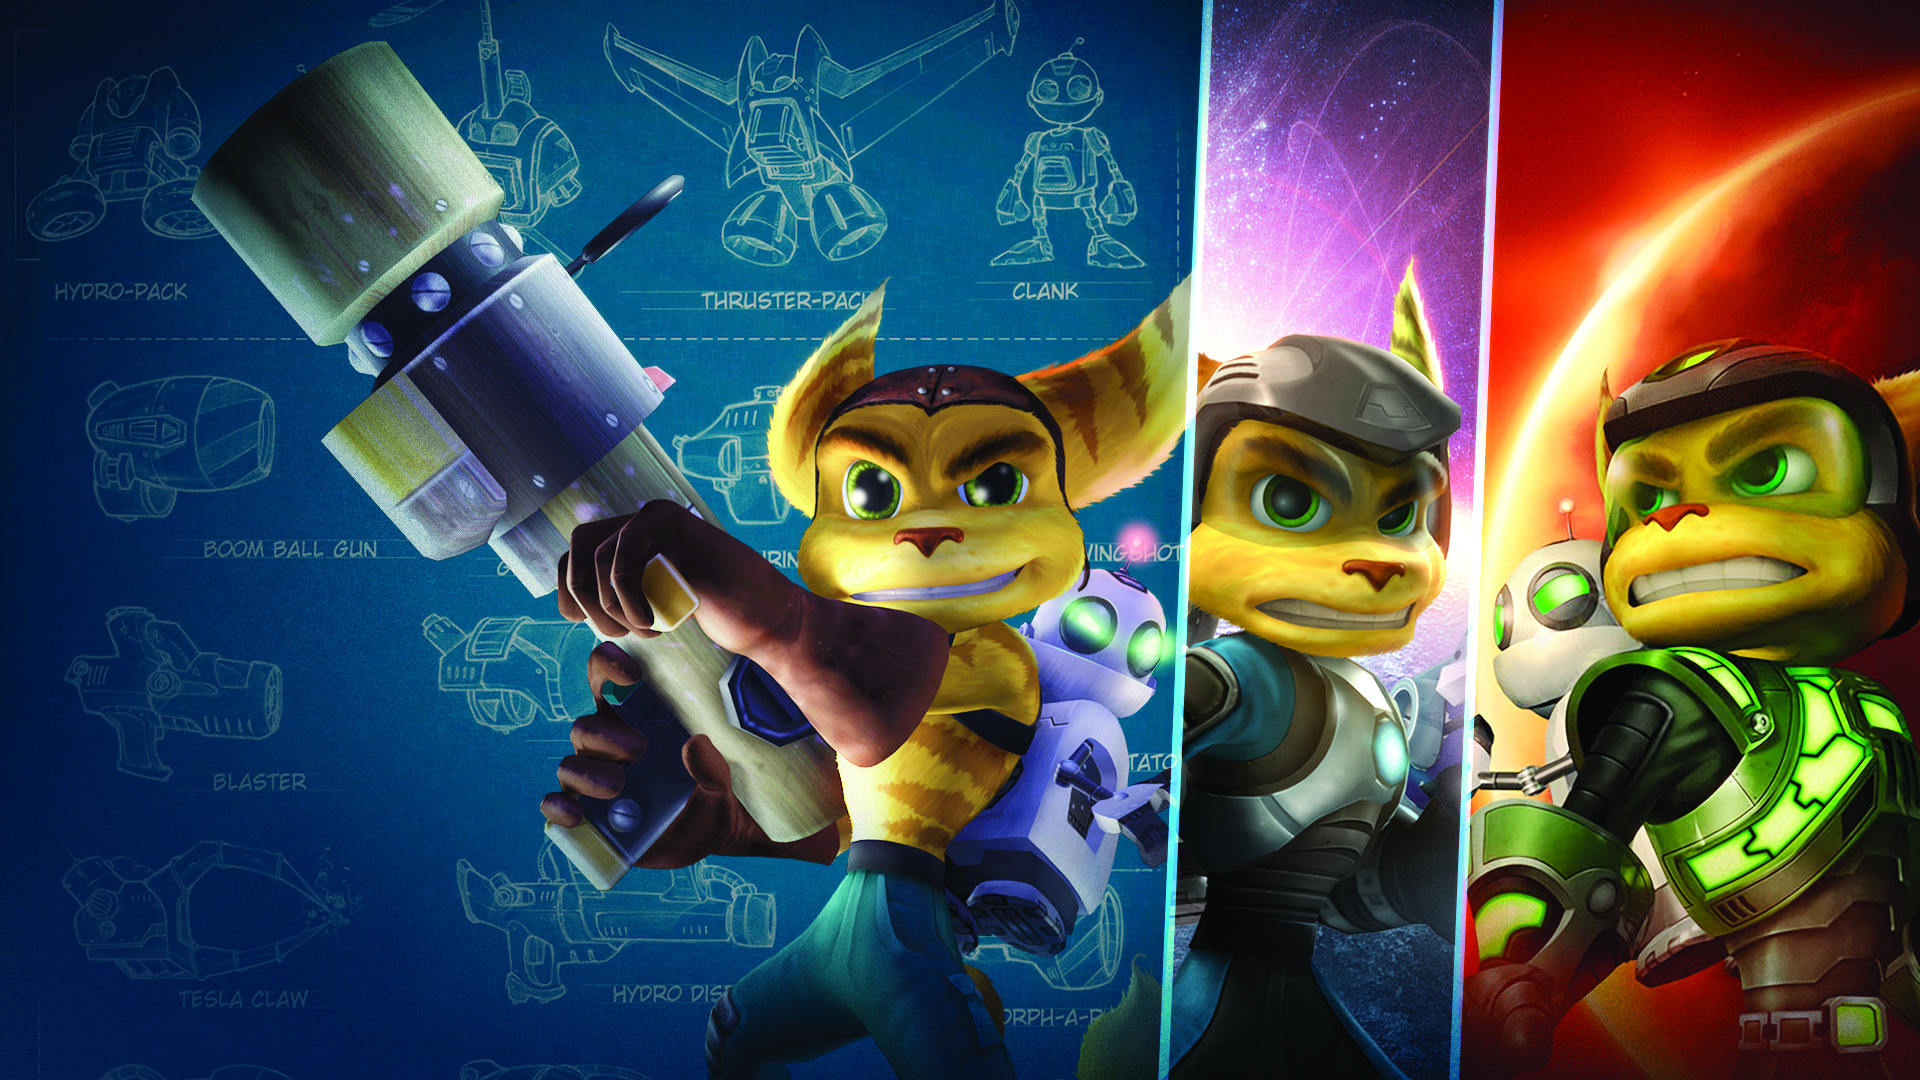 ratchet and clank collection